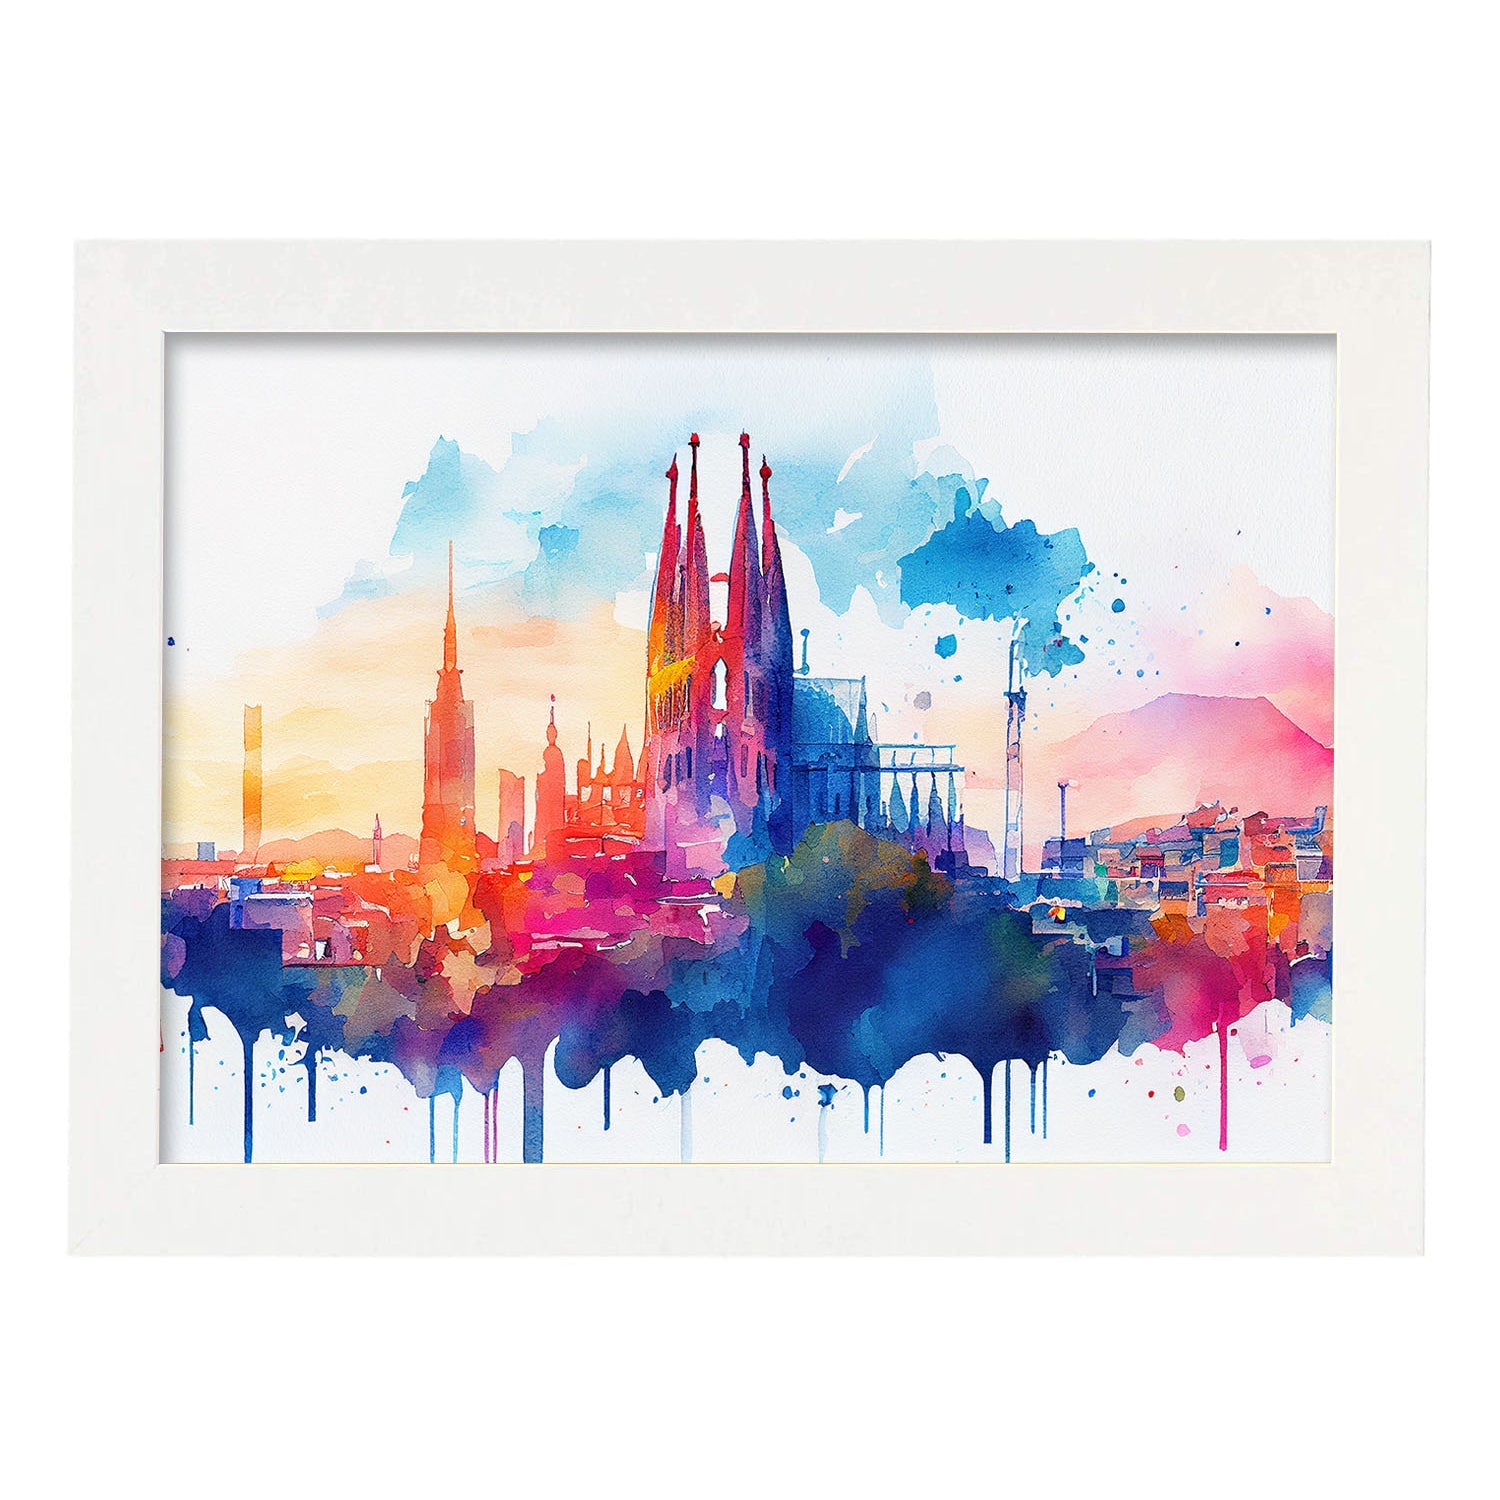 Nacnic watercolor of a skyline of the city of Barcelona_1. Aesthetic Wall Art Prints for Bedroom or Living Room Design.-Artwork-Nacnic-A4-Marco Blanco-Nacnic Estudio SL